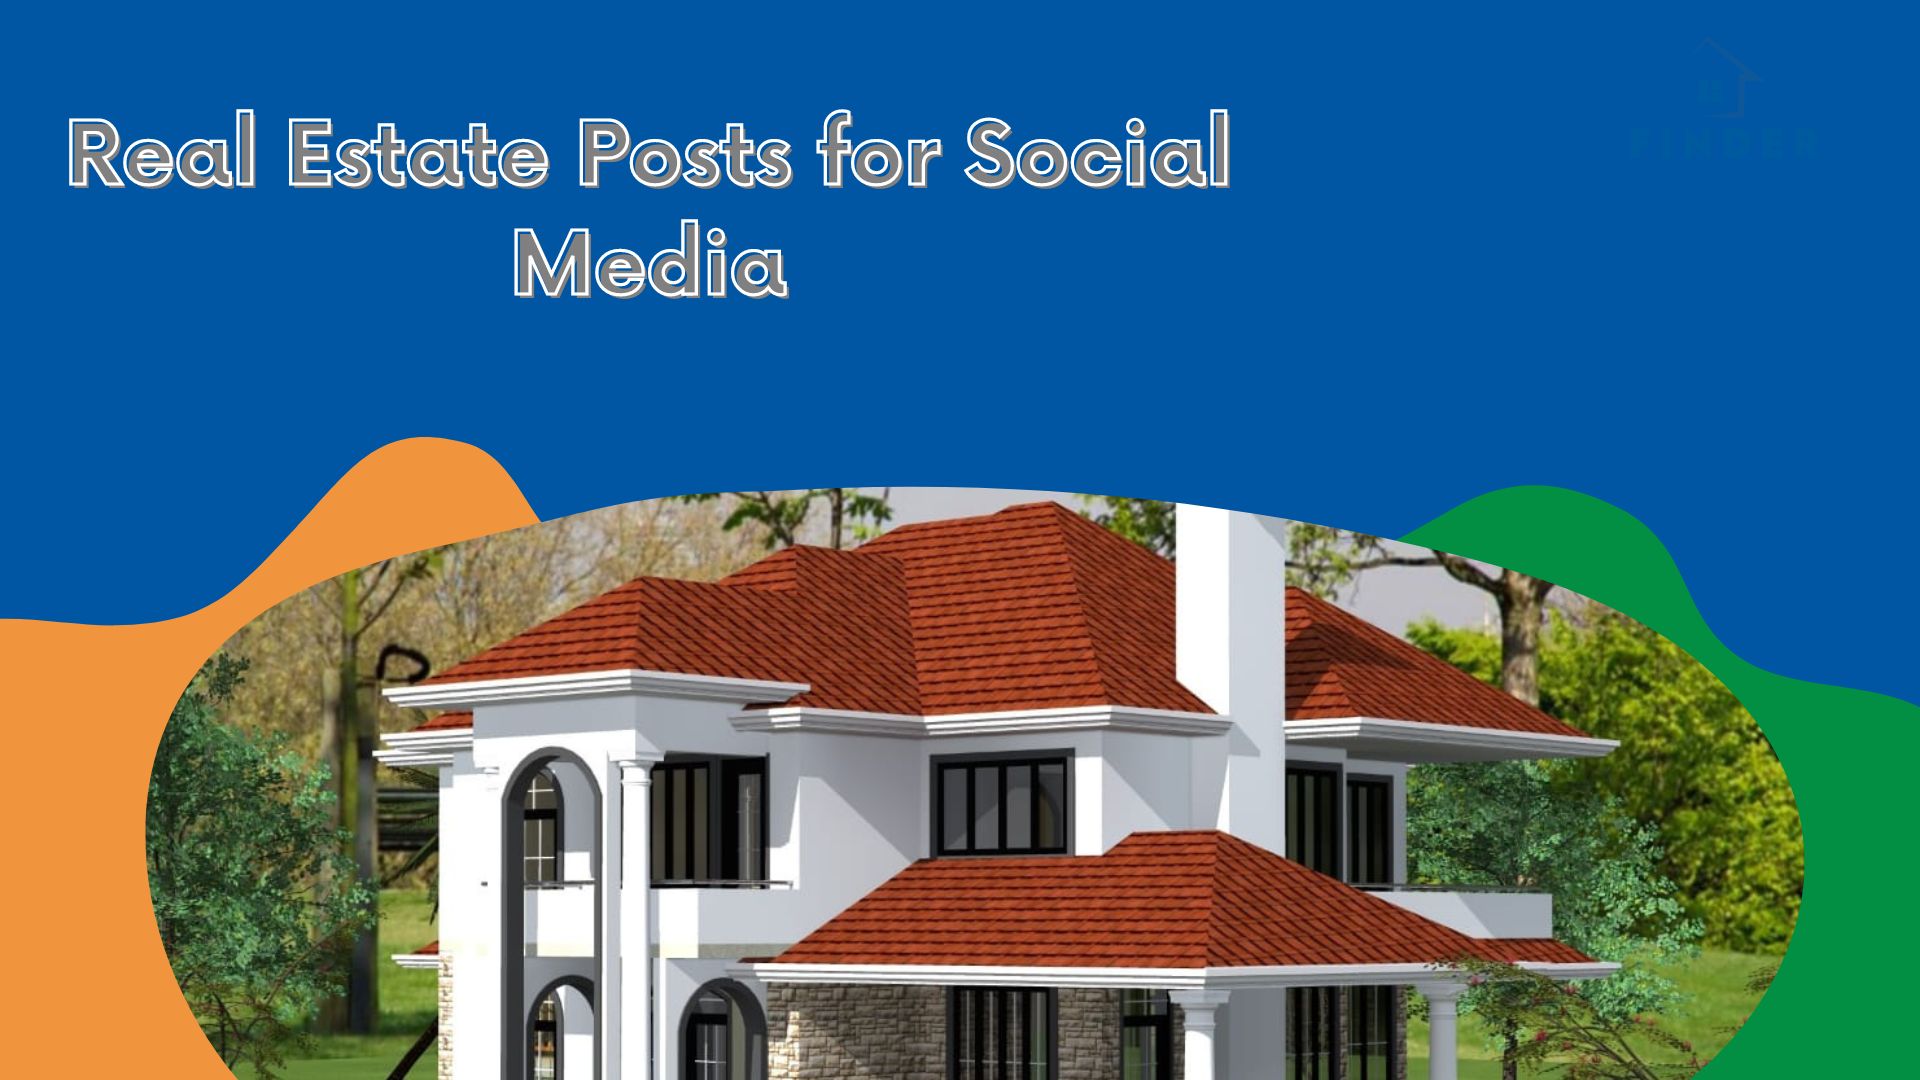 100 Real Estate Posts for Social Media: The Ultimate Guide for Consistent Content Creation